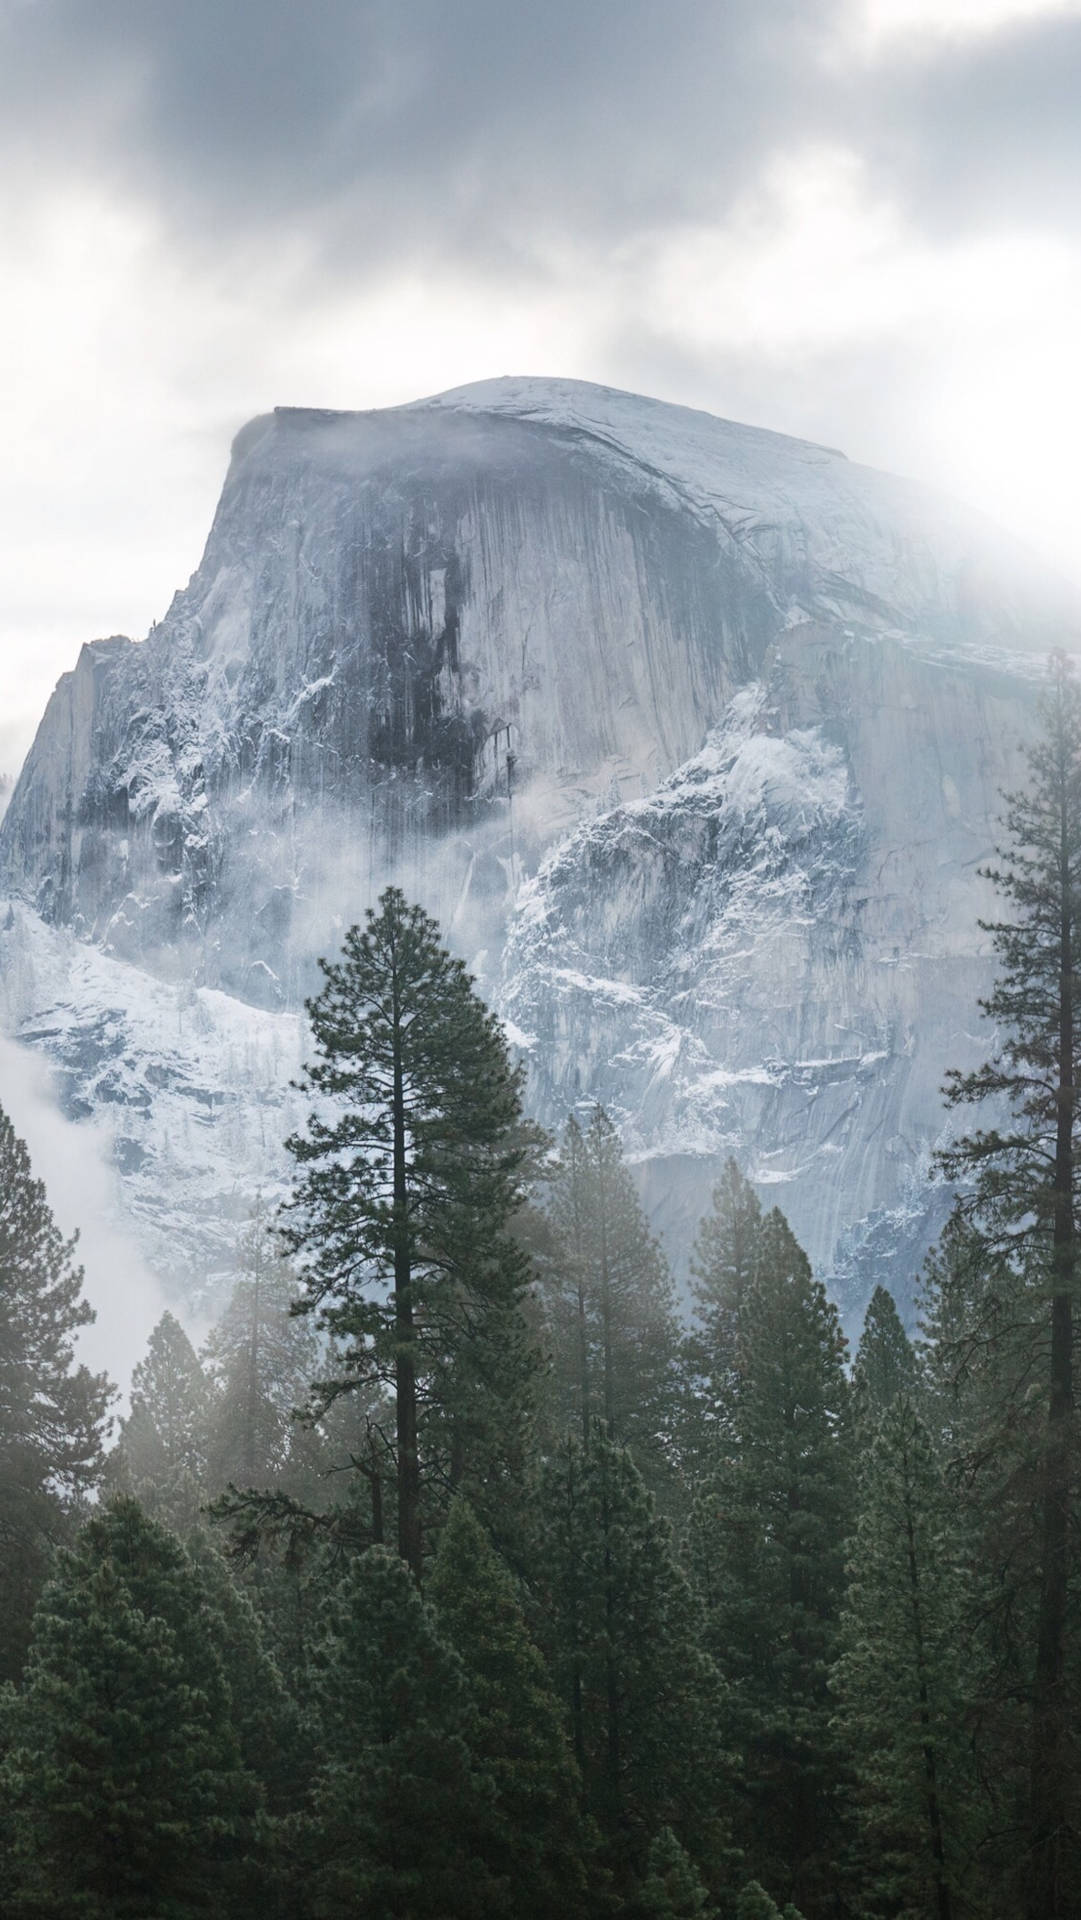 Enjoy a picturesque view of Yosemite valley from the convenience of your iPhone Wallpaper